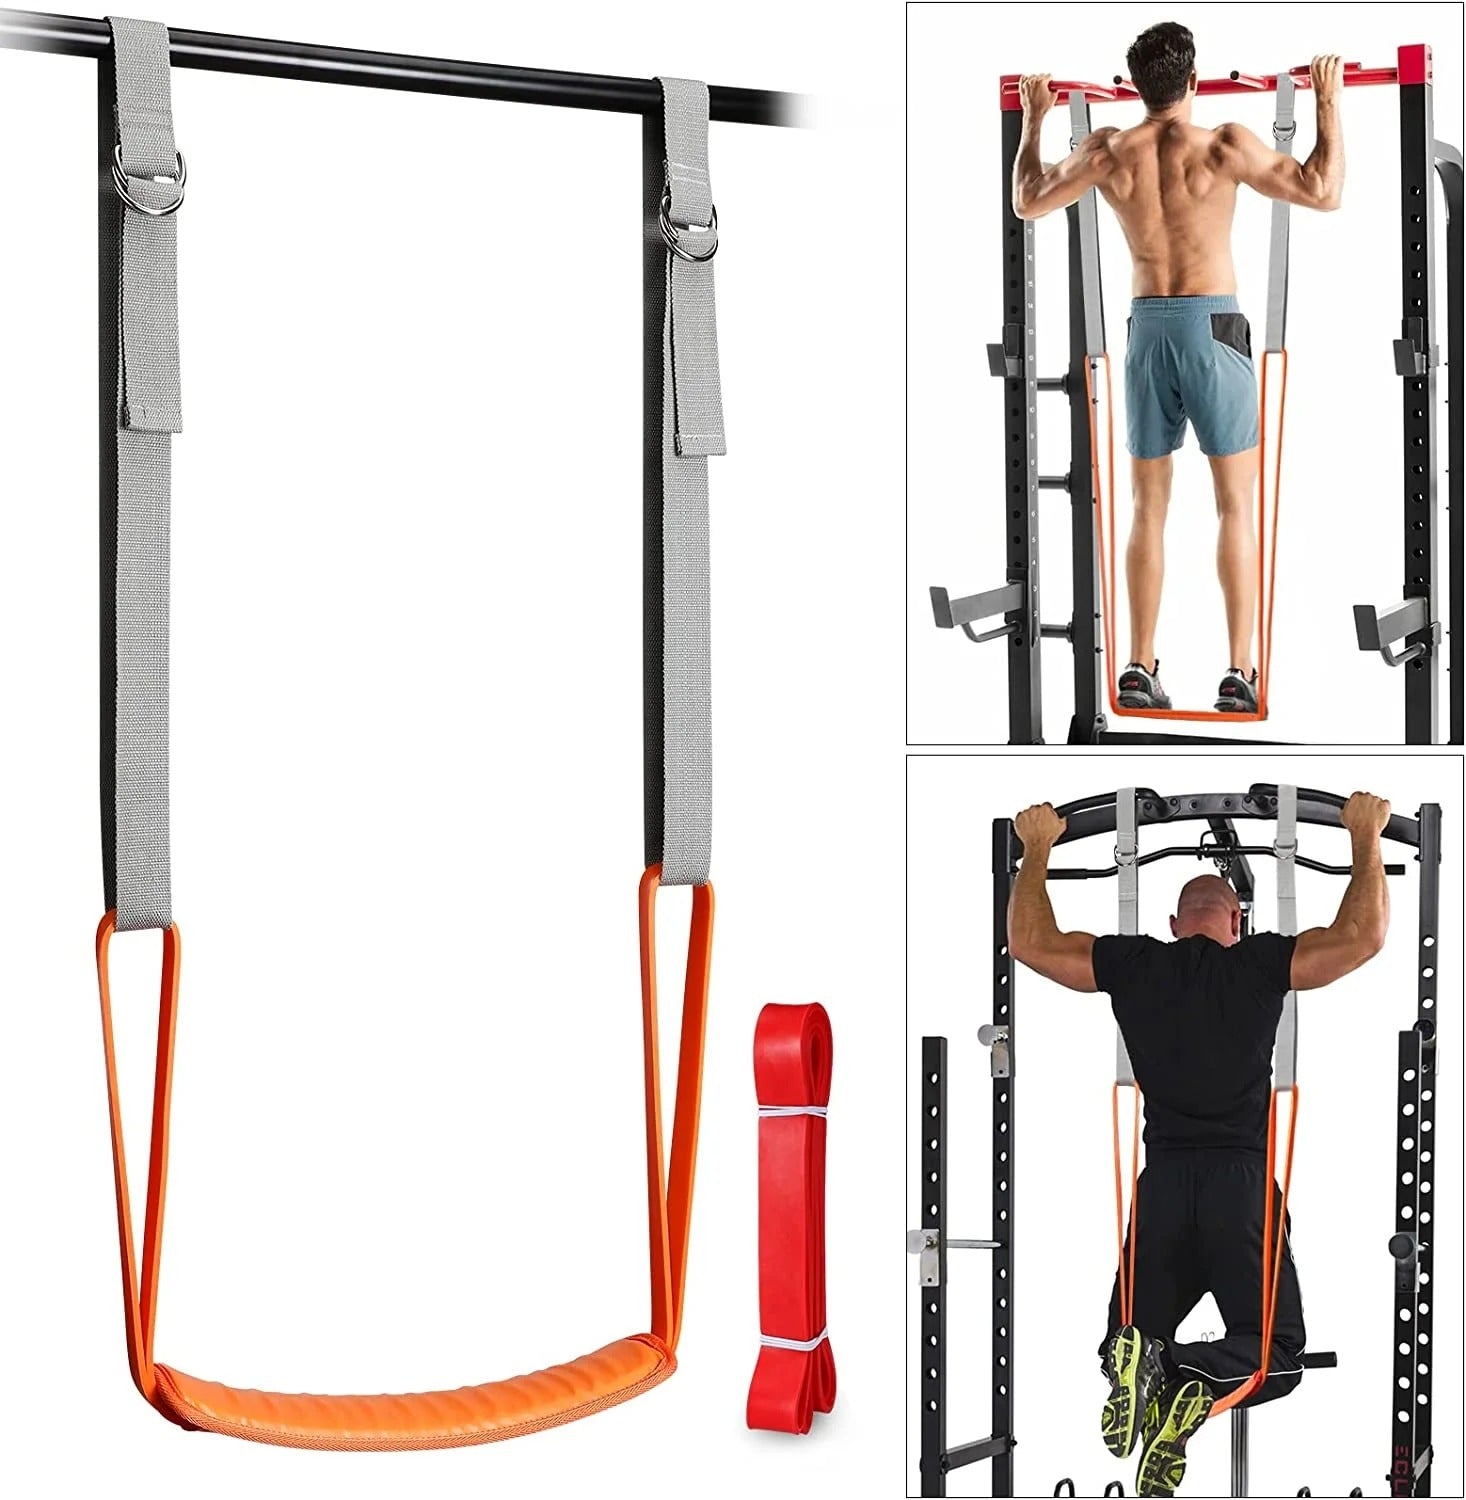 Resistance band set for pull-up support for men and women